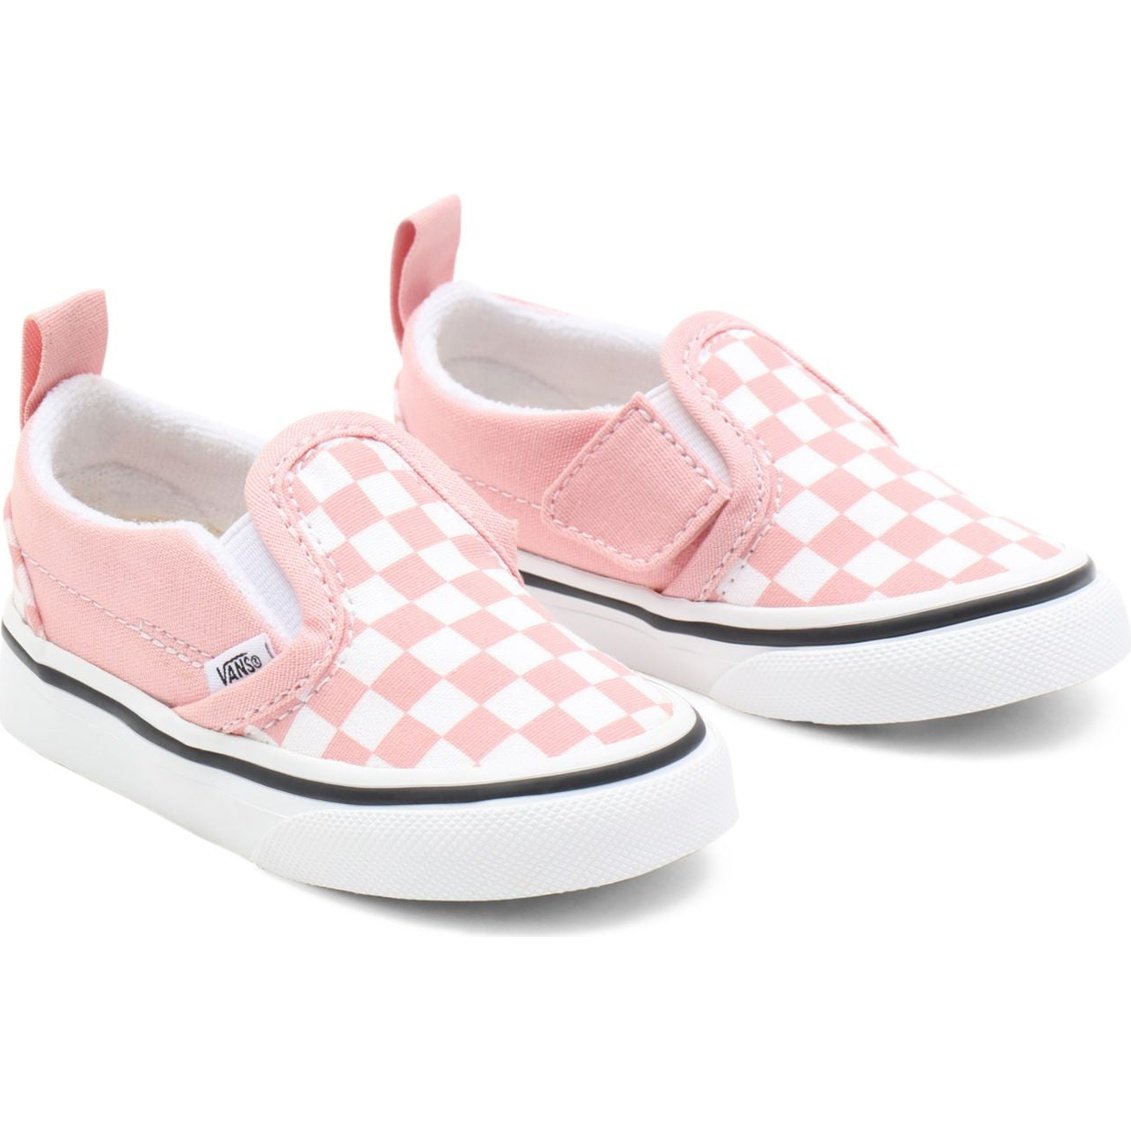 Toddler Checkerboard Slip-On Velcro Shoes (1-4 years)